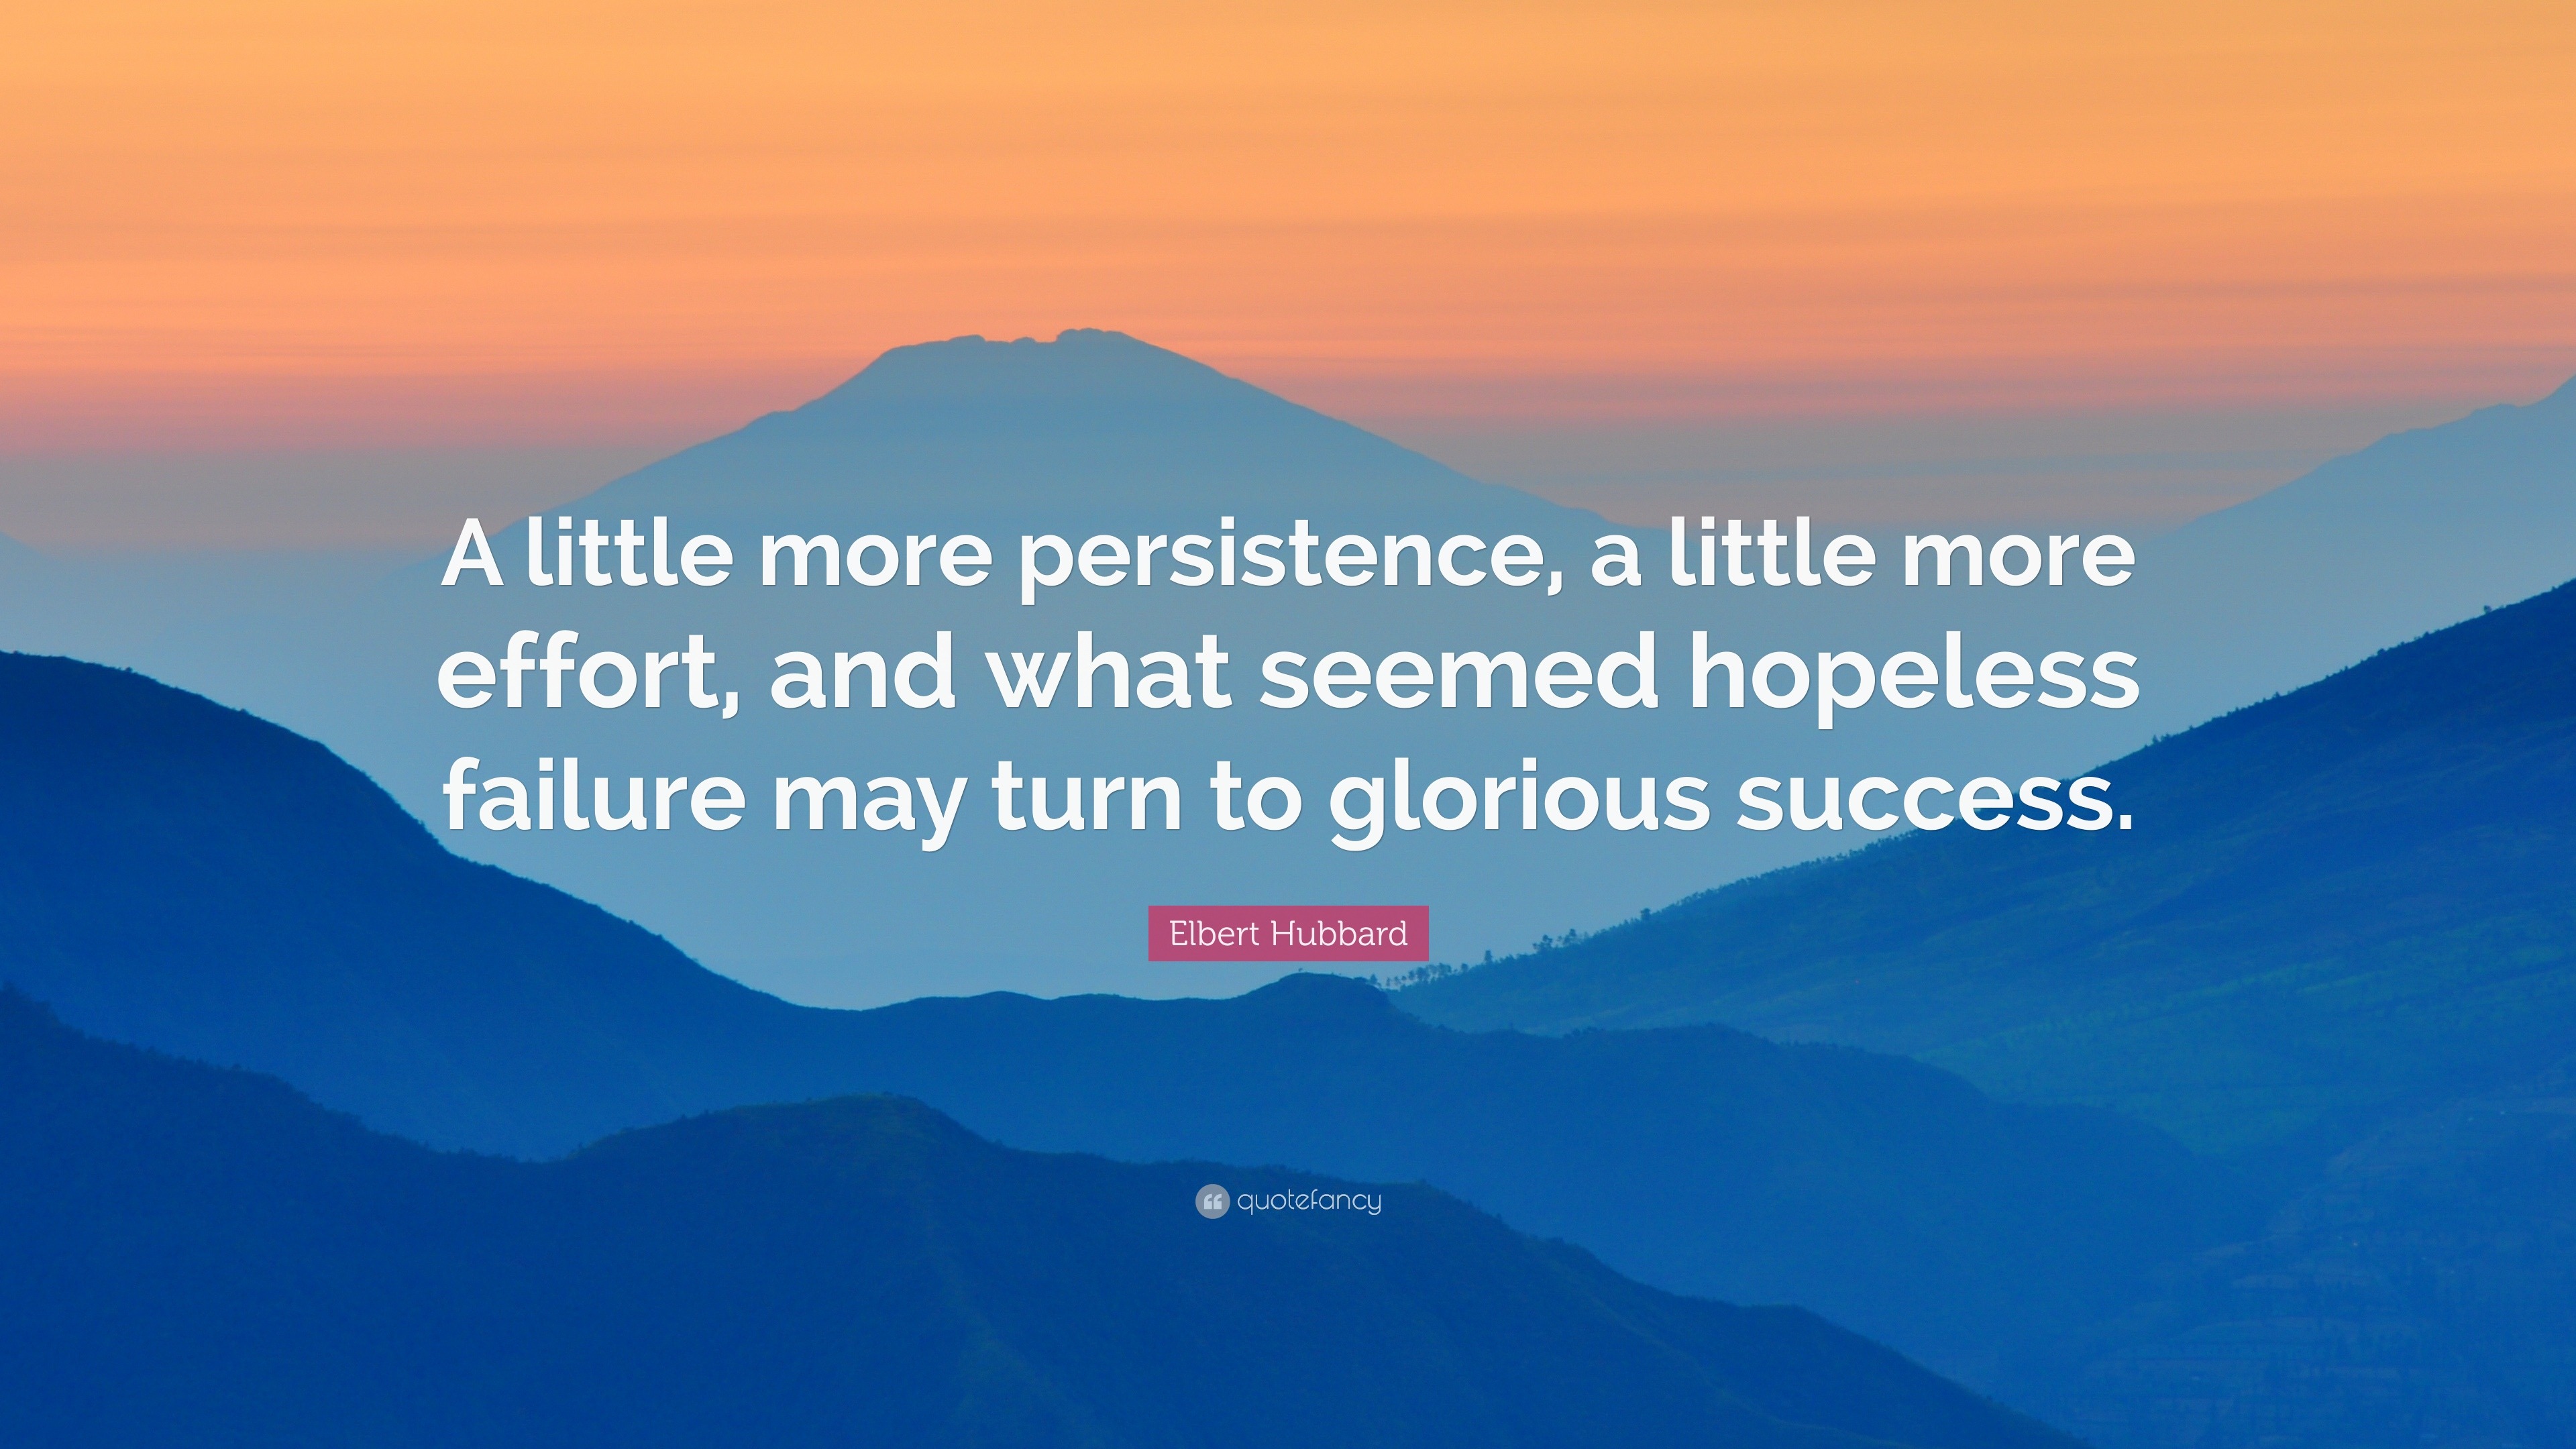 Perseverance Quotes (58 wallpapers) - Quotefancy